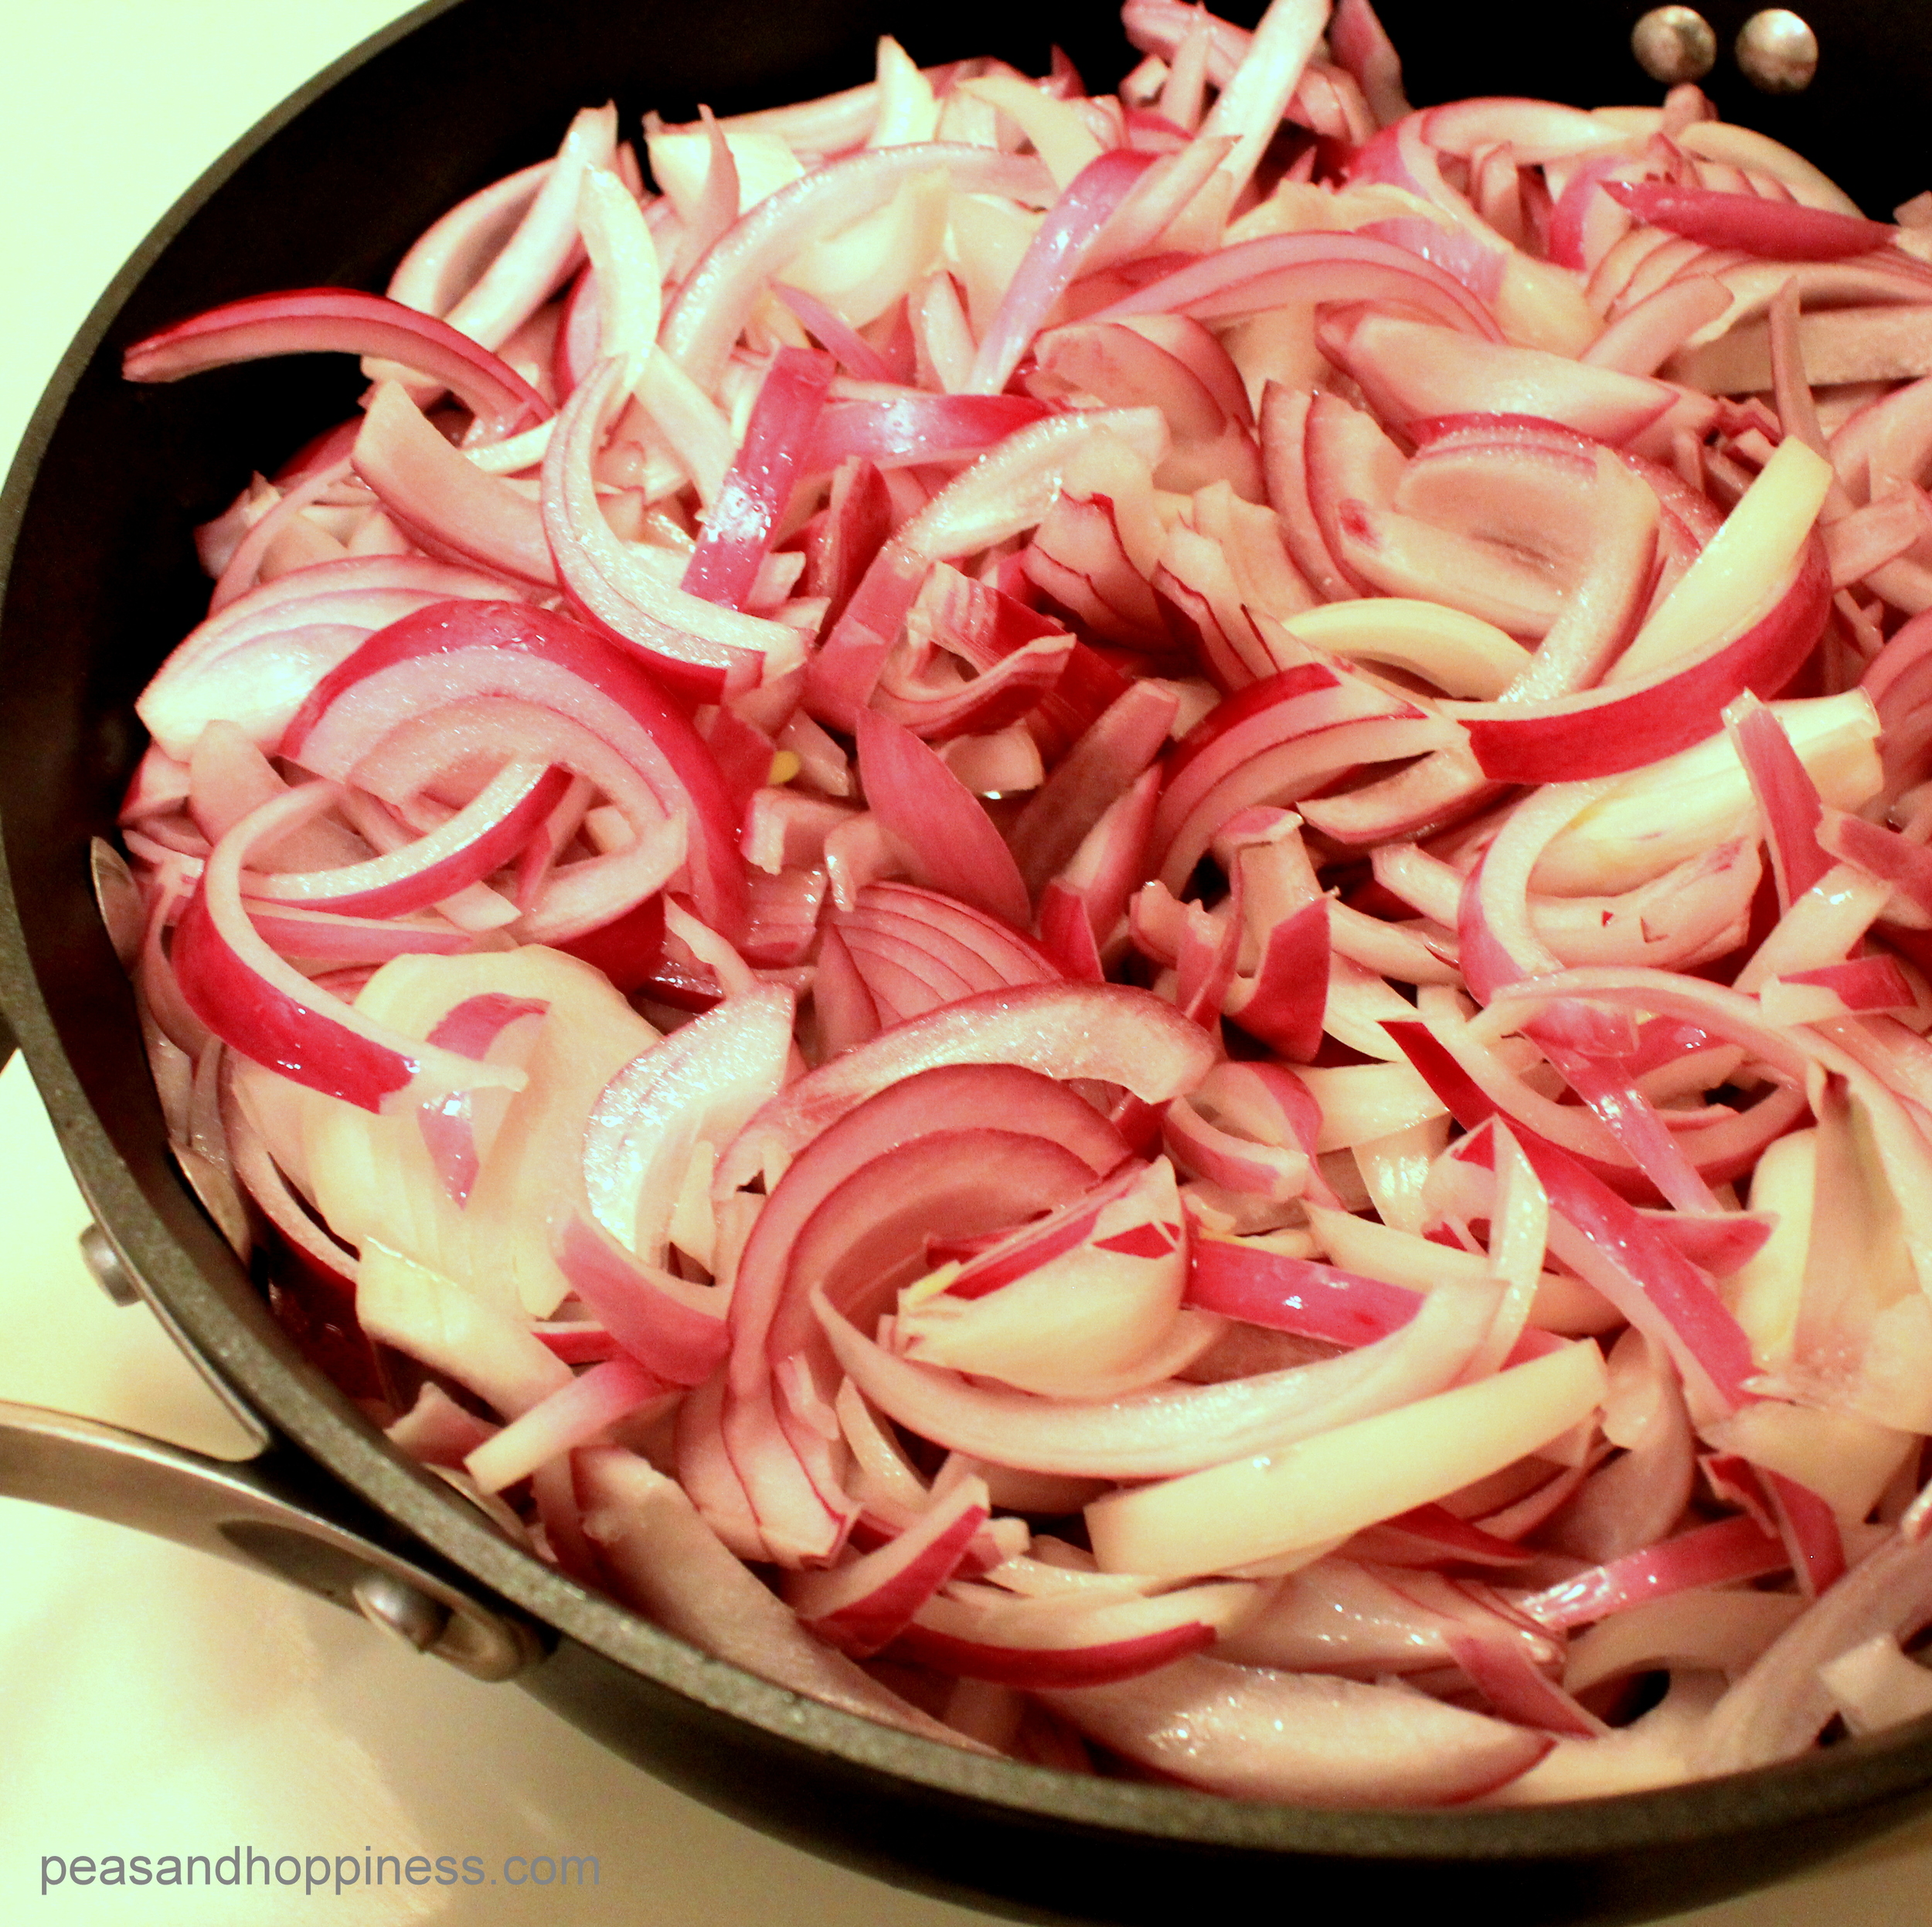 Sizzling onions